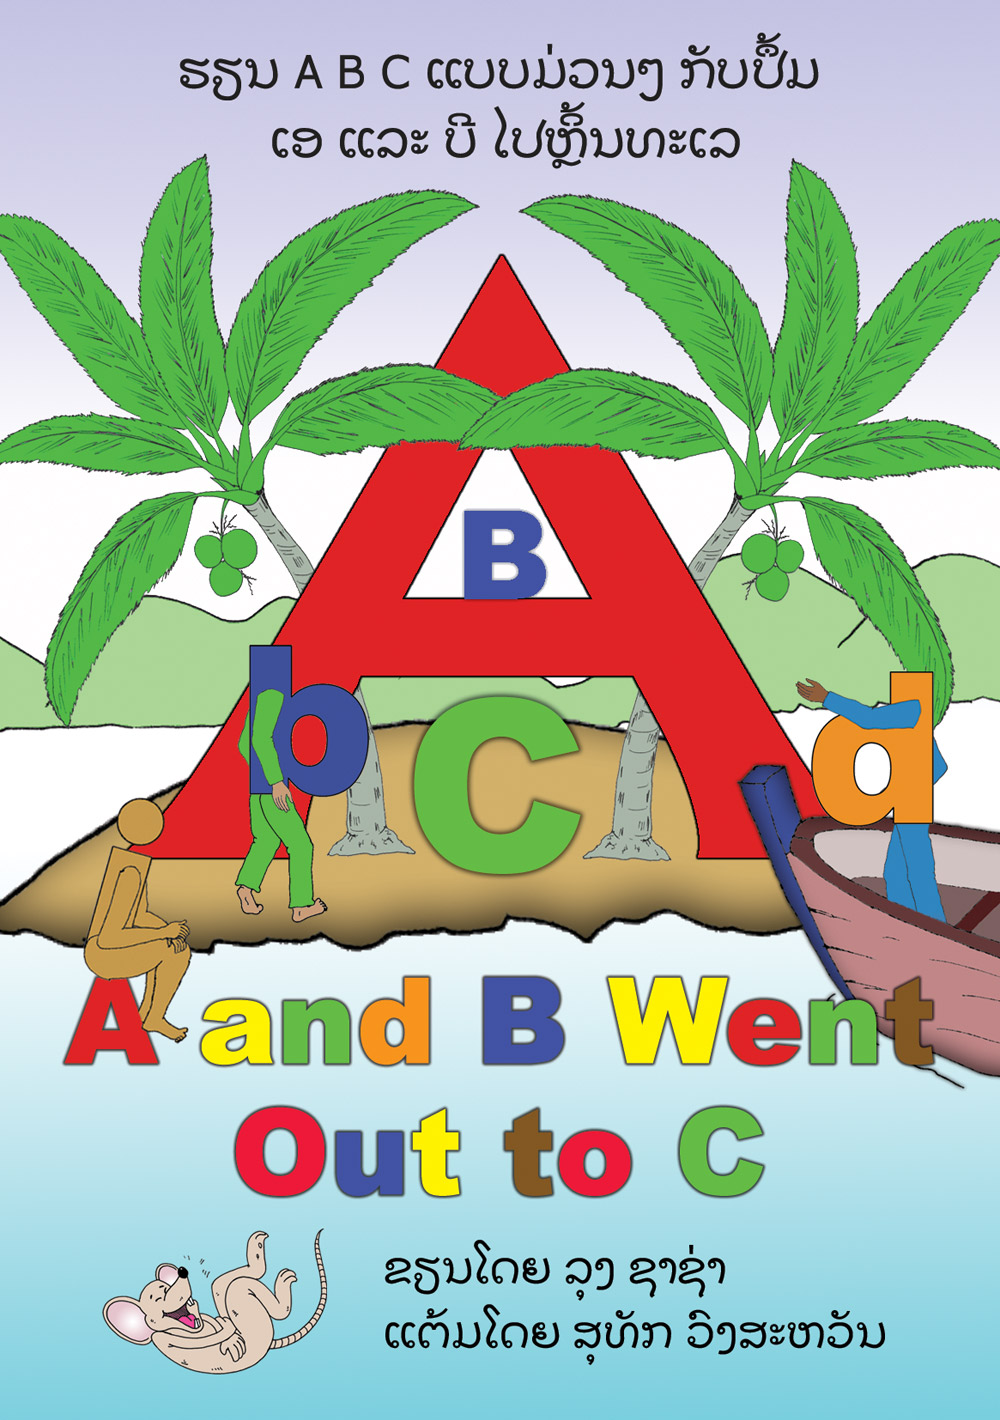 A and B went out to C large book cover, published in English for Lao students